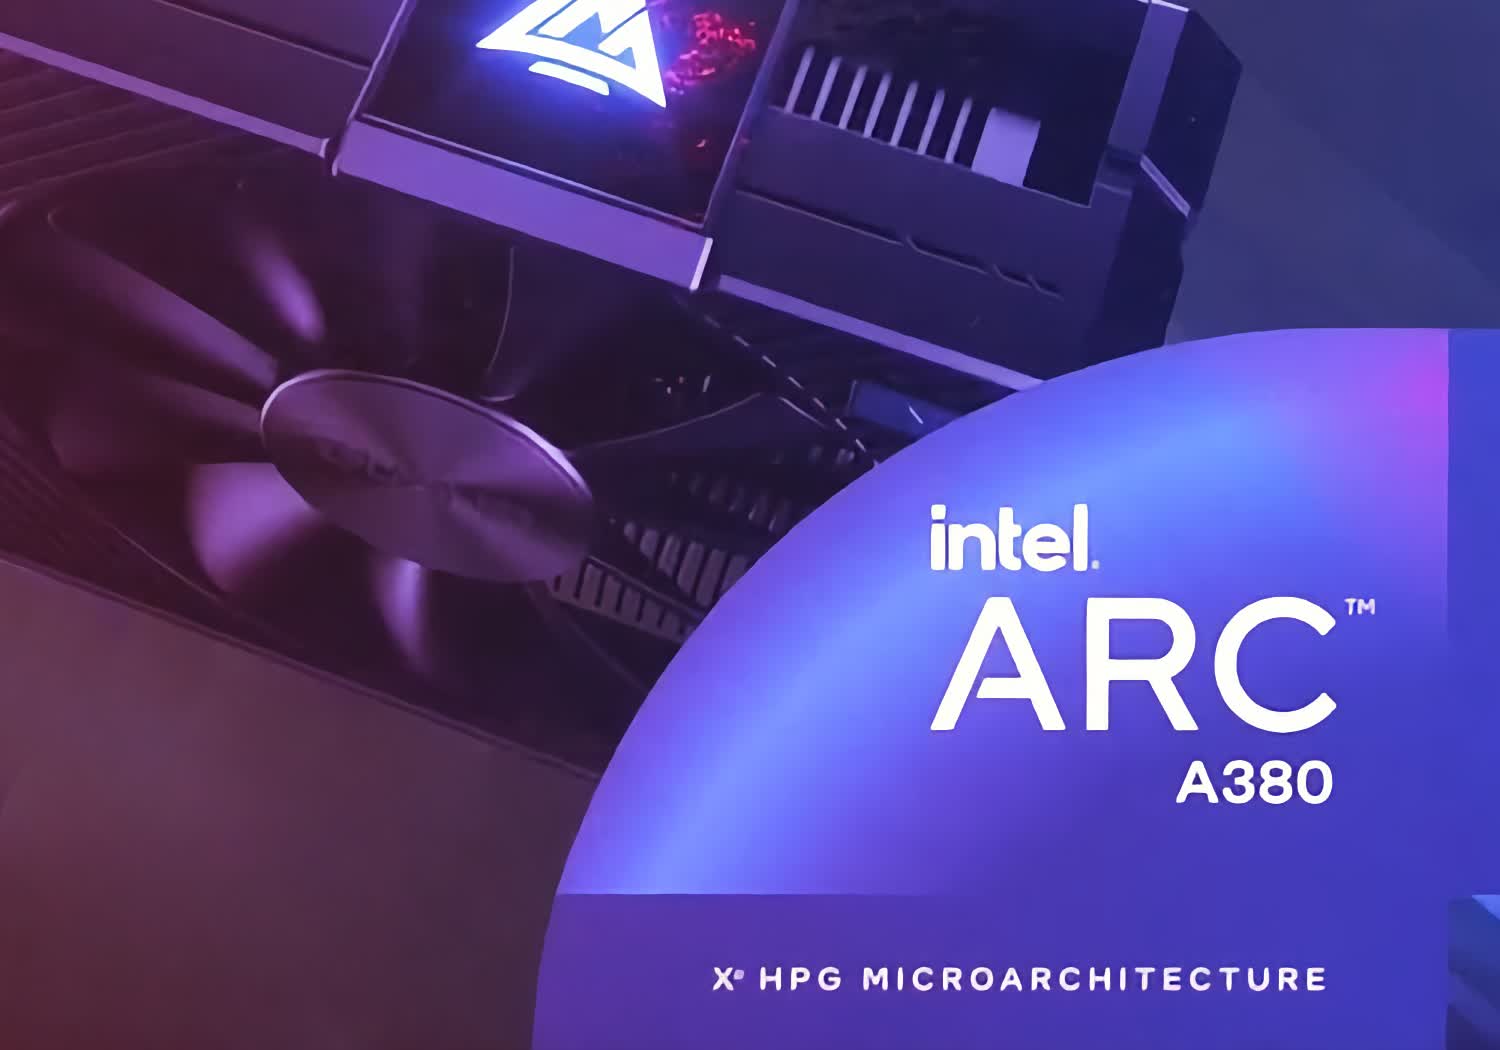 Intel Arc A380 Review: First-Gen GPU. What’s Going On?